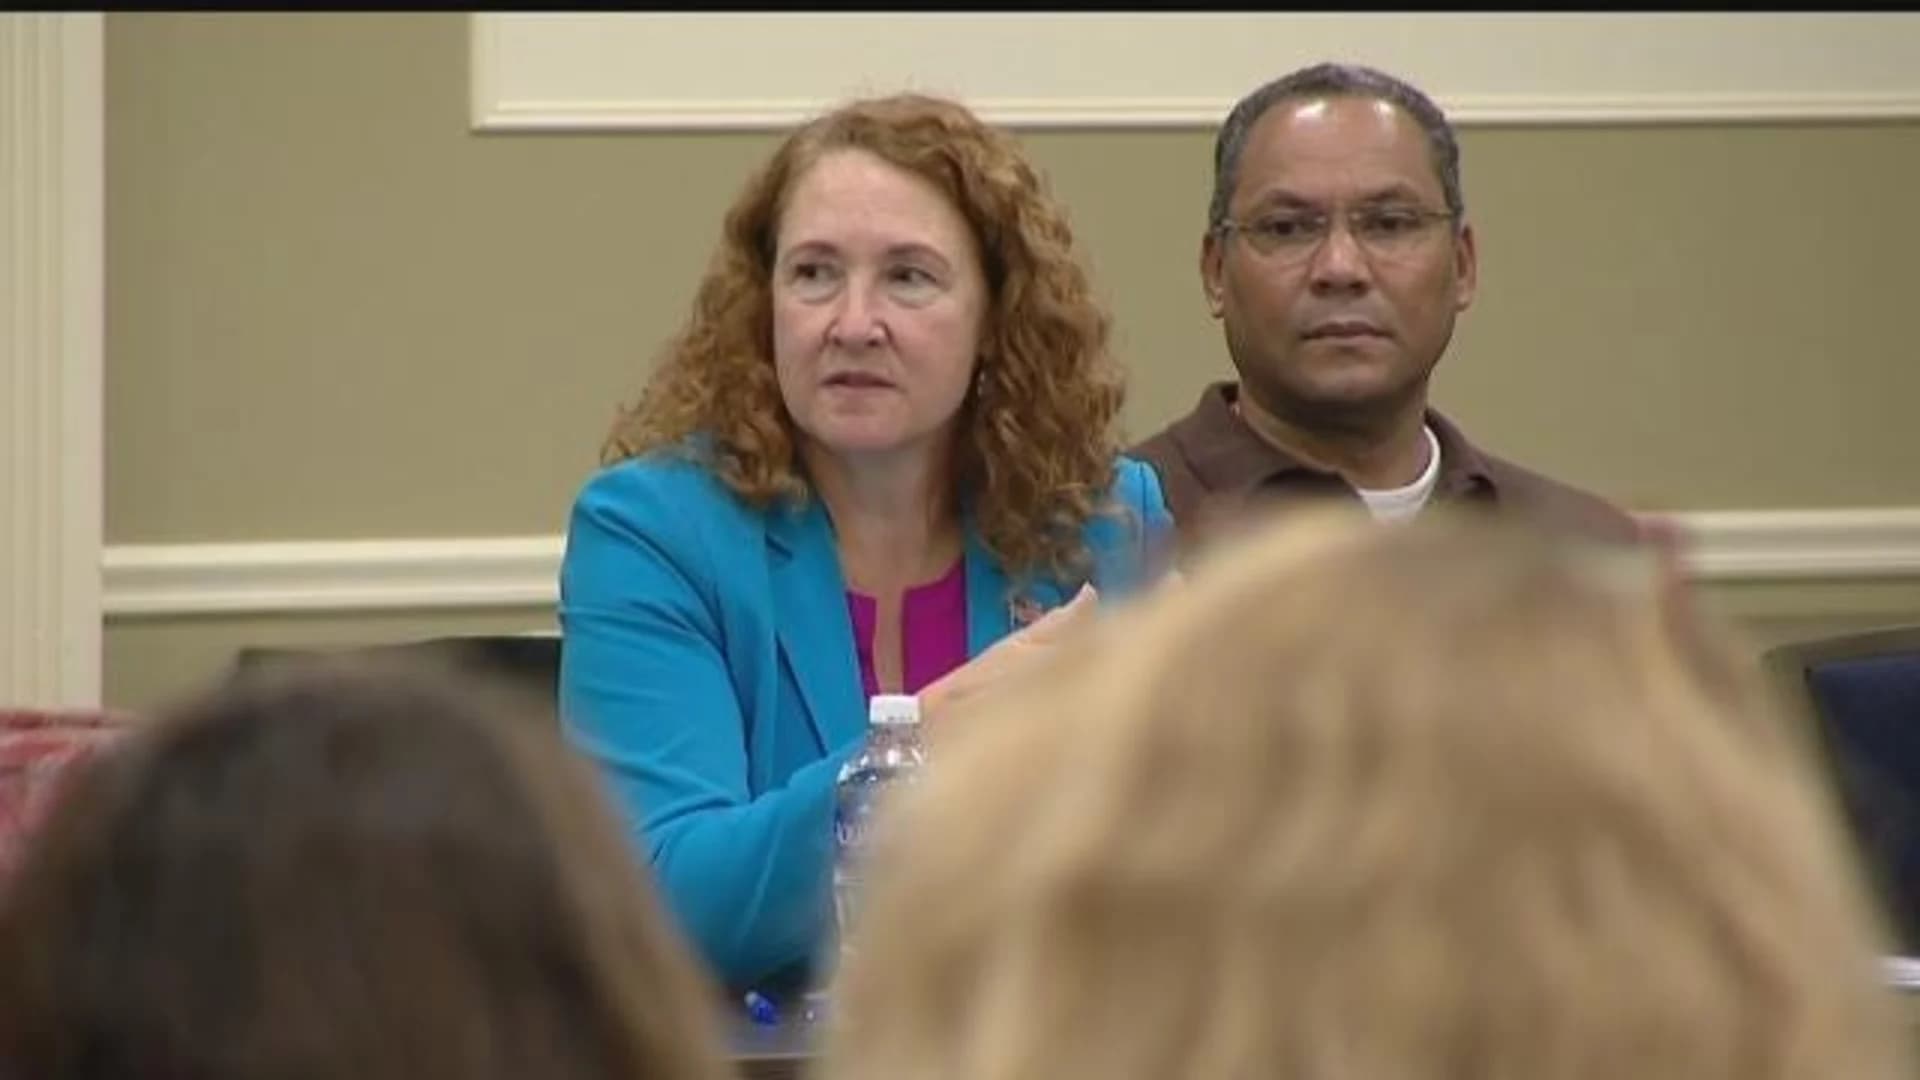 Rep. Esty apologizes, says she won't resign early